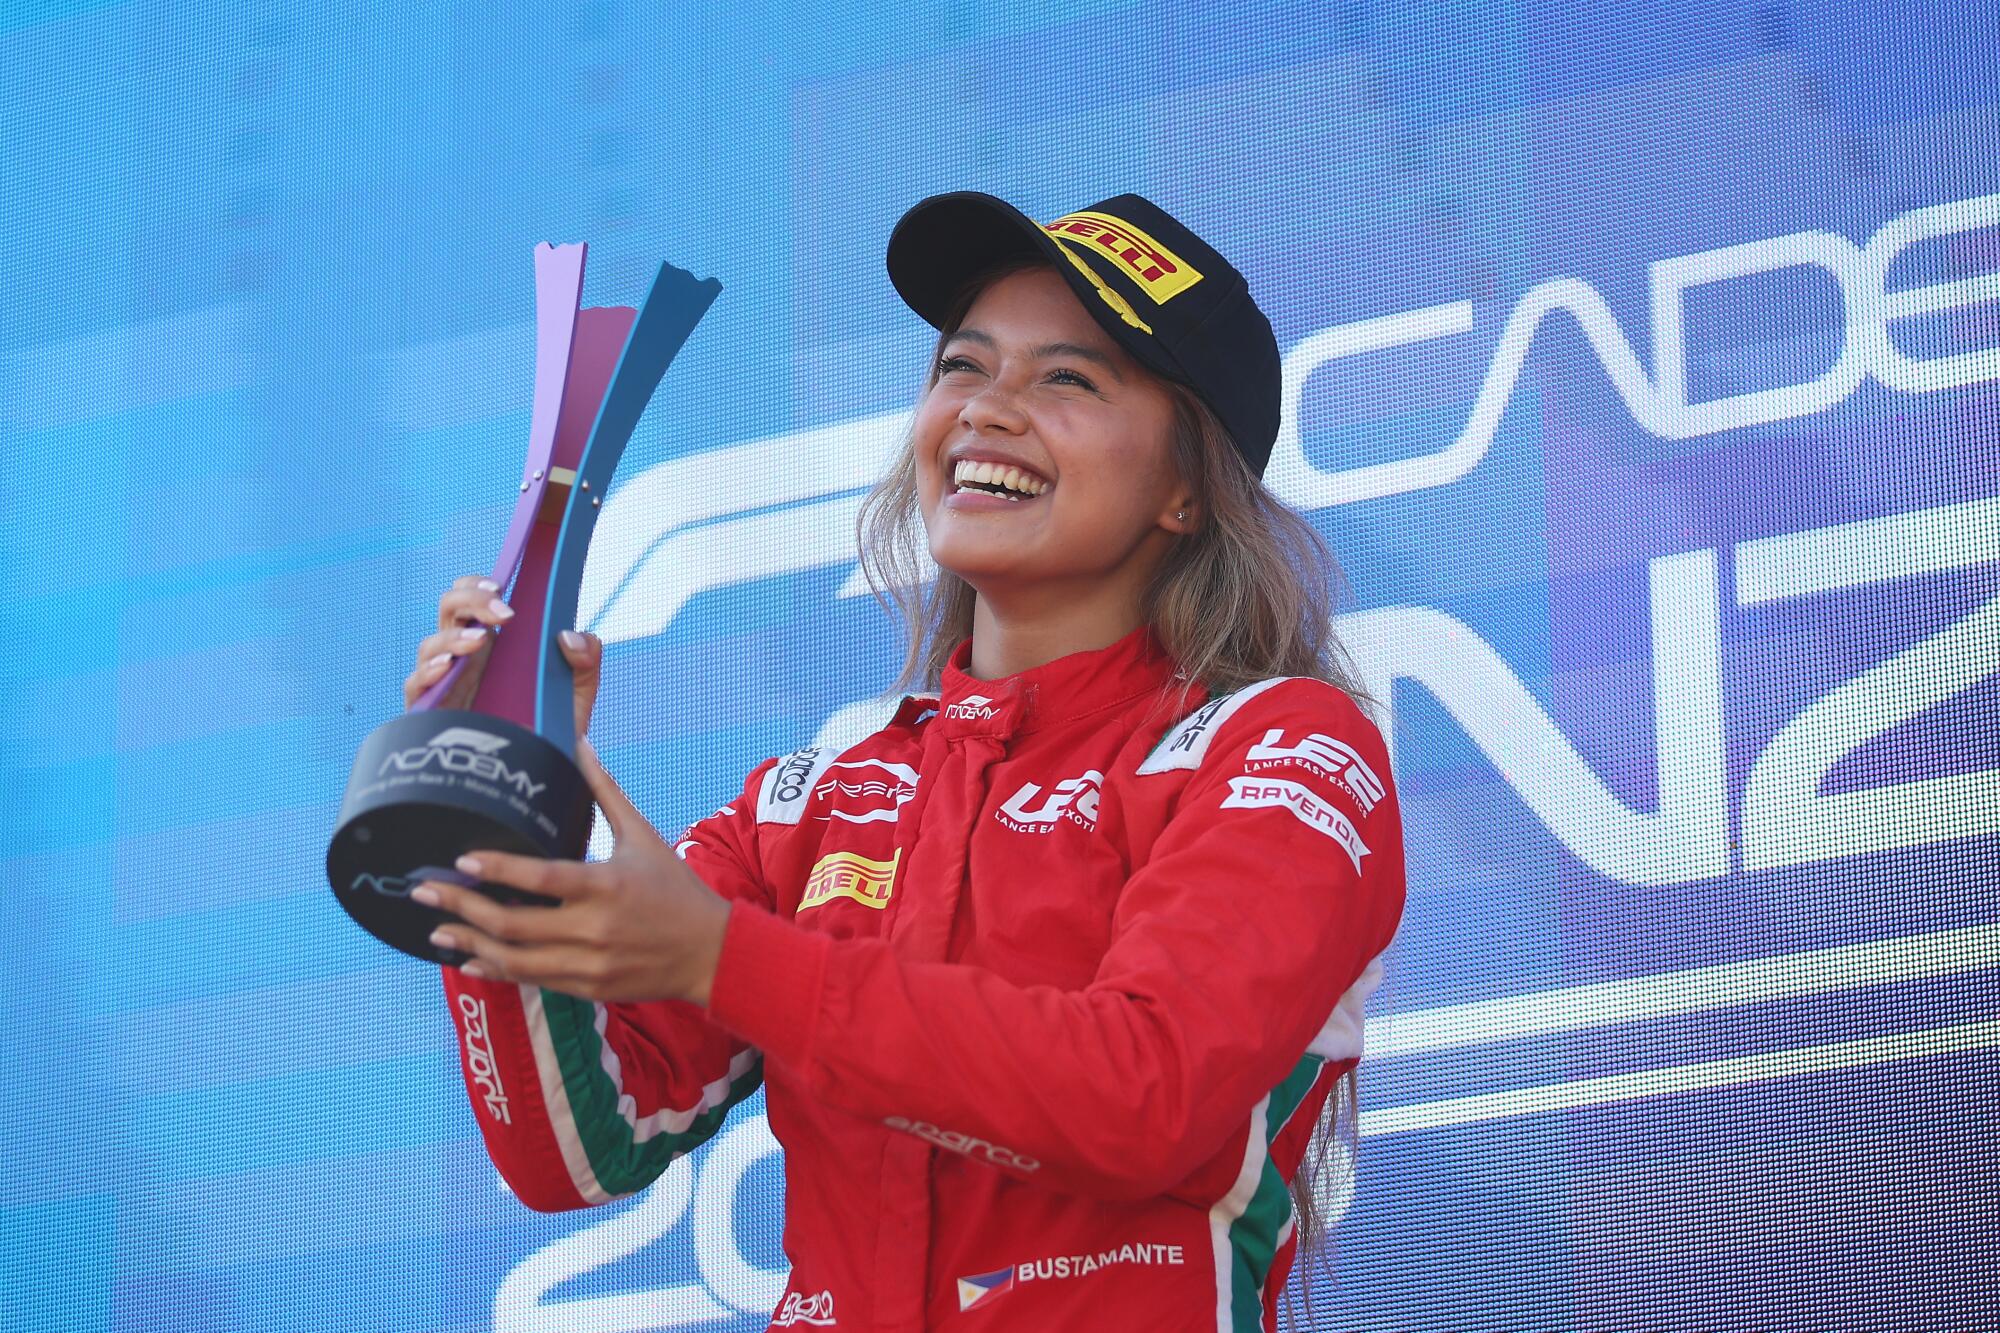 Race winner Bianca Bustamante celebrates after winning an F1 Academy Series race at Monza in Italy on July 9.